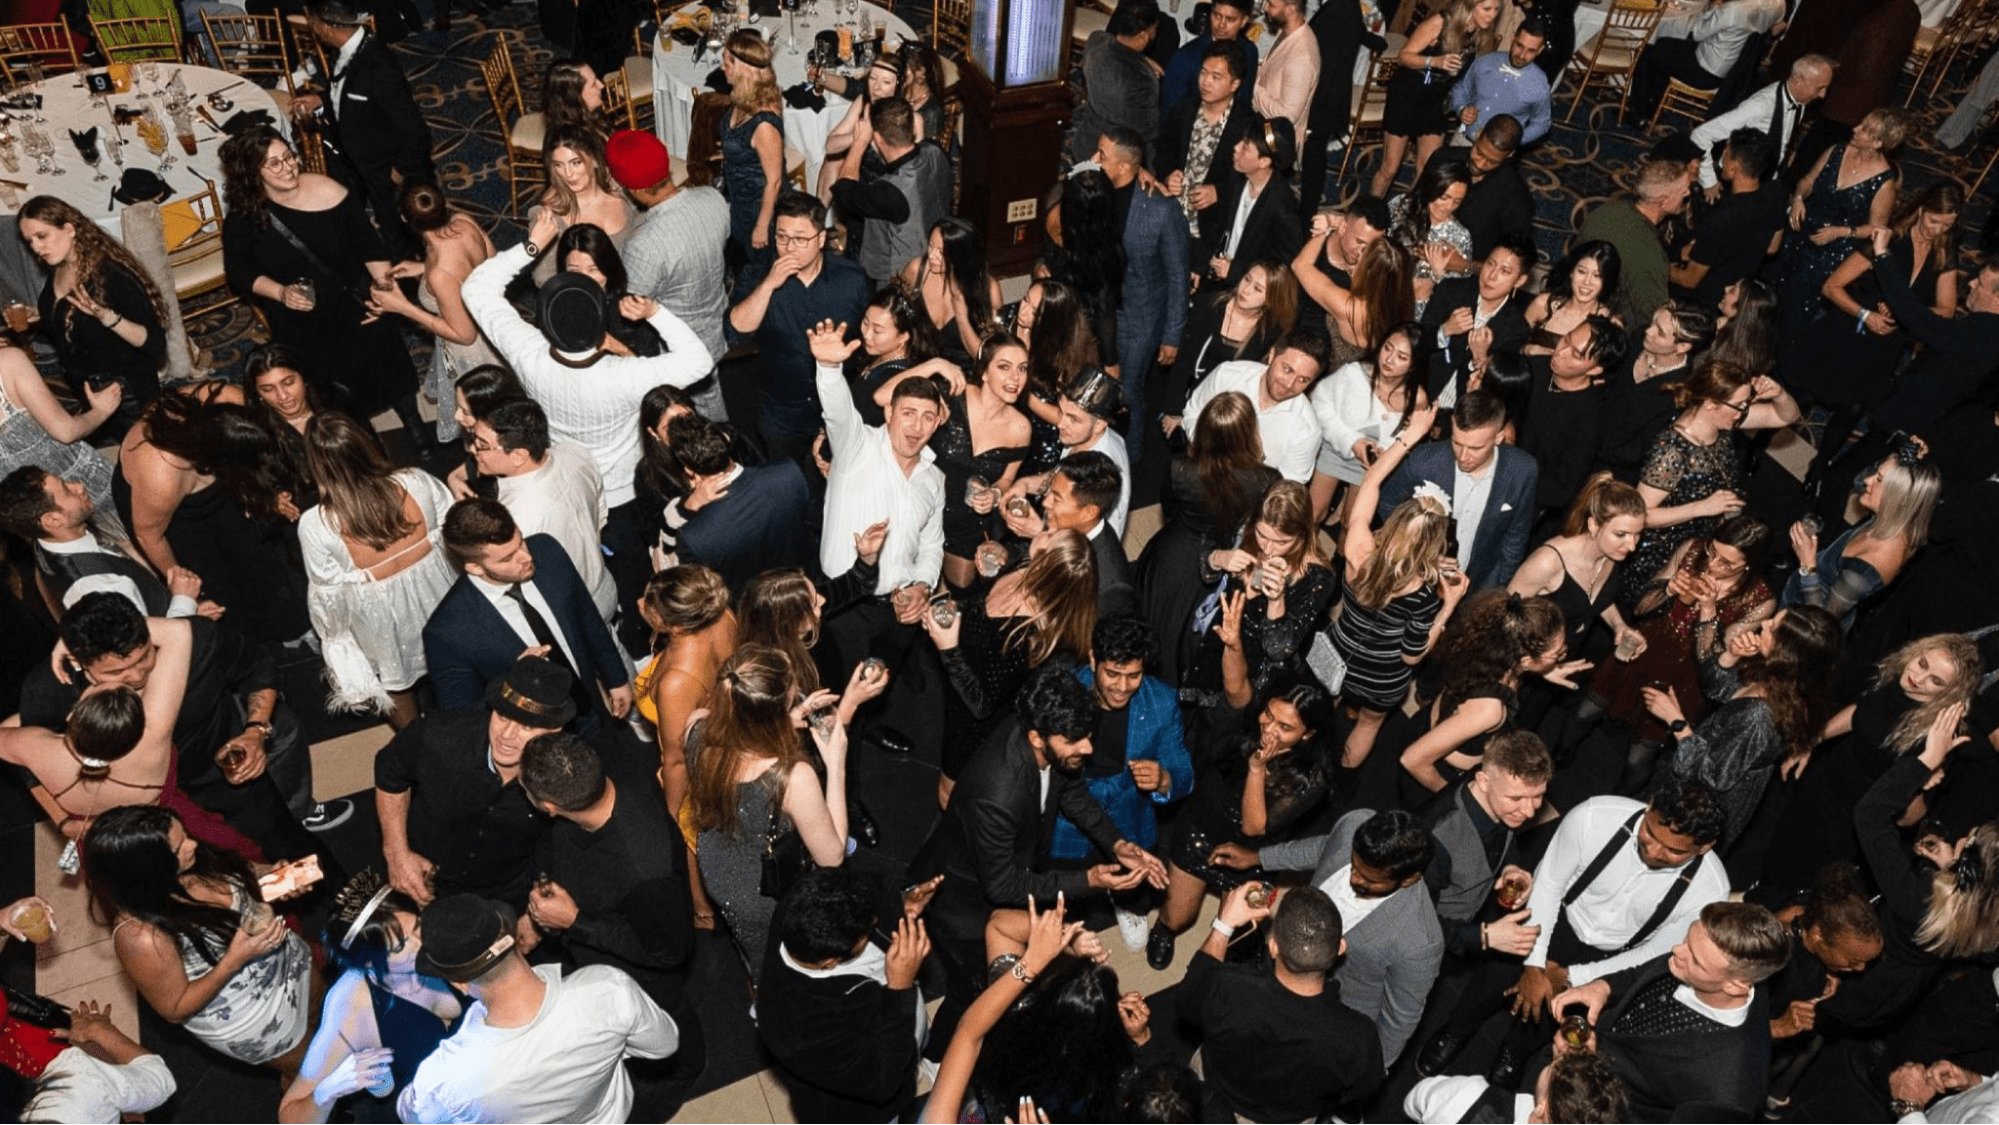 Attendees at a formal dance party